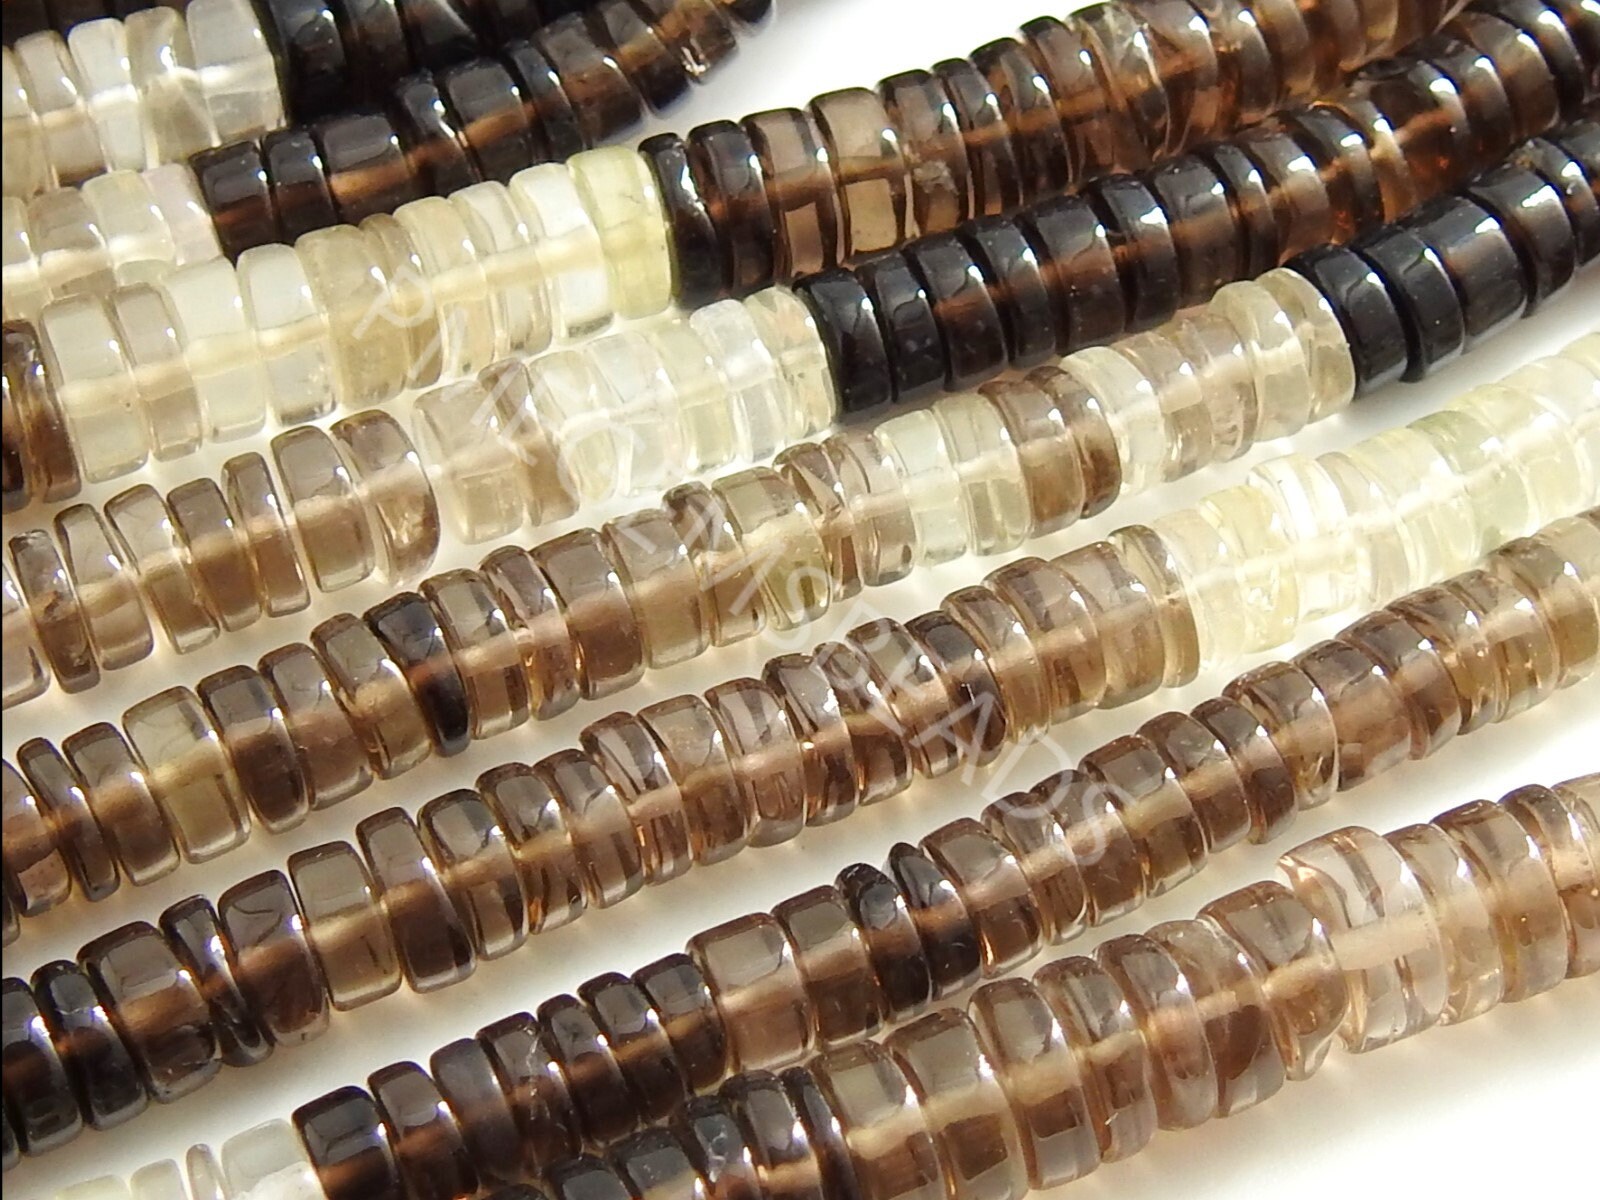 Smoky Quartz Smooth Tyres,Coin,Button Shape Bead,Multi Shaded,Loose Stone,Handmade,For Jewelry Makers 16Inch Strand 100%Natural (Pme)T2 | Save 33% - Rajasthan Living 15